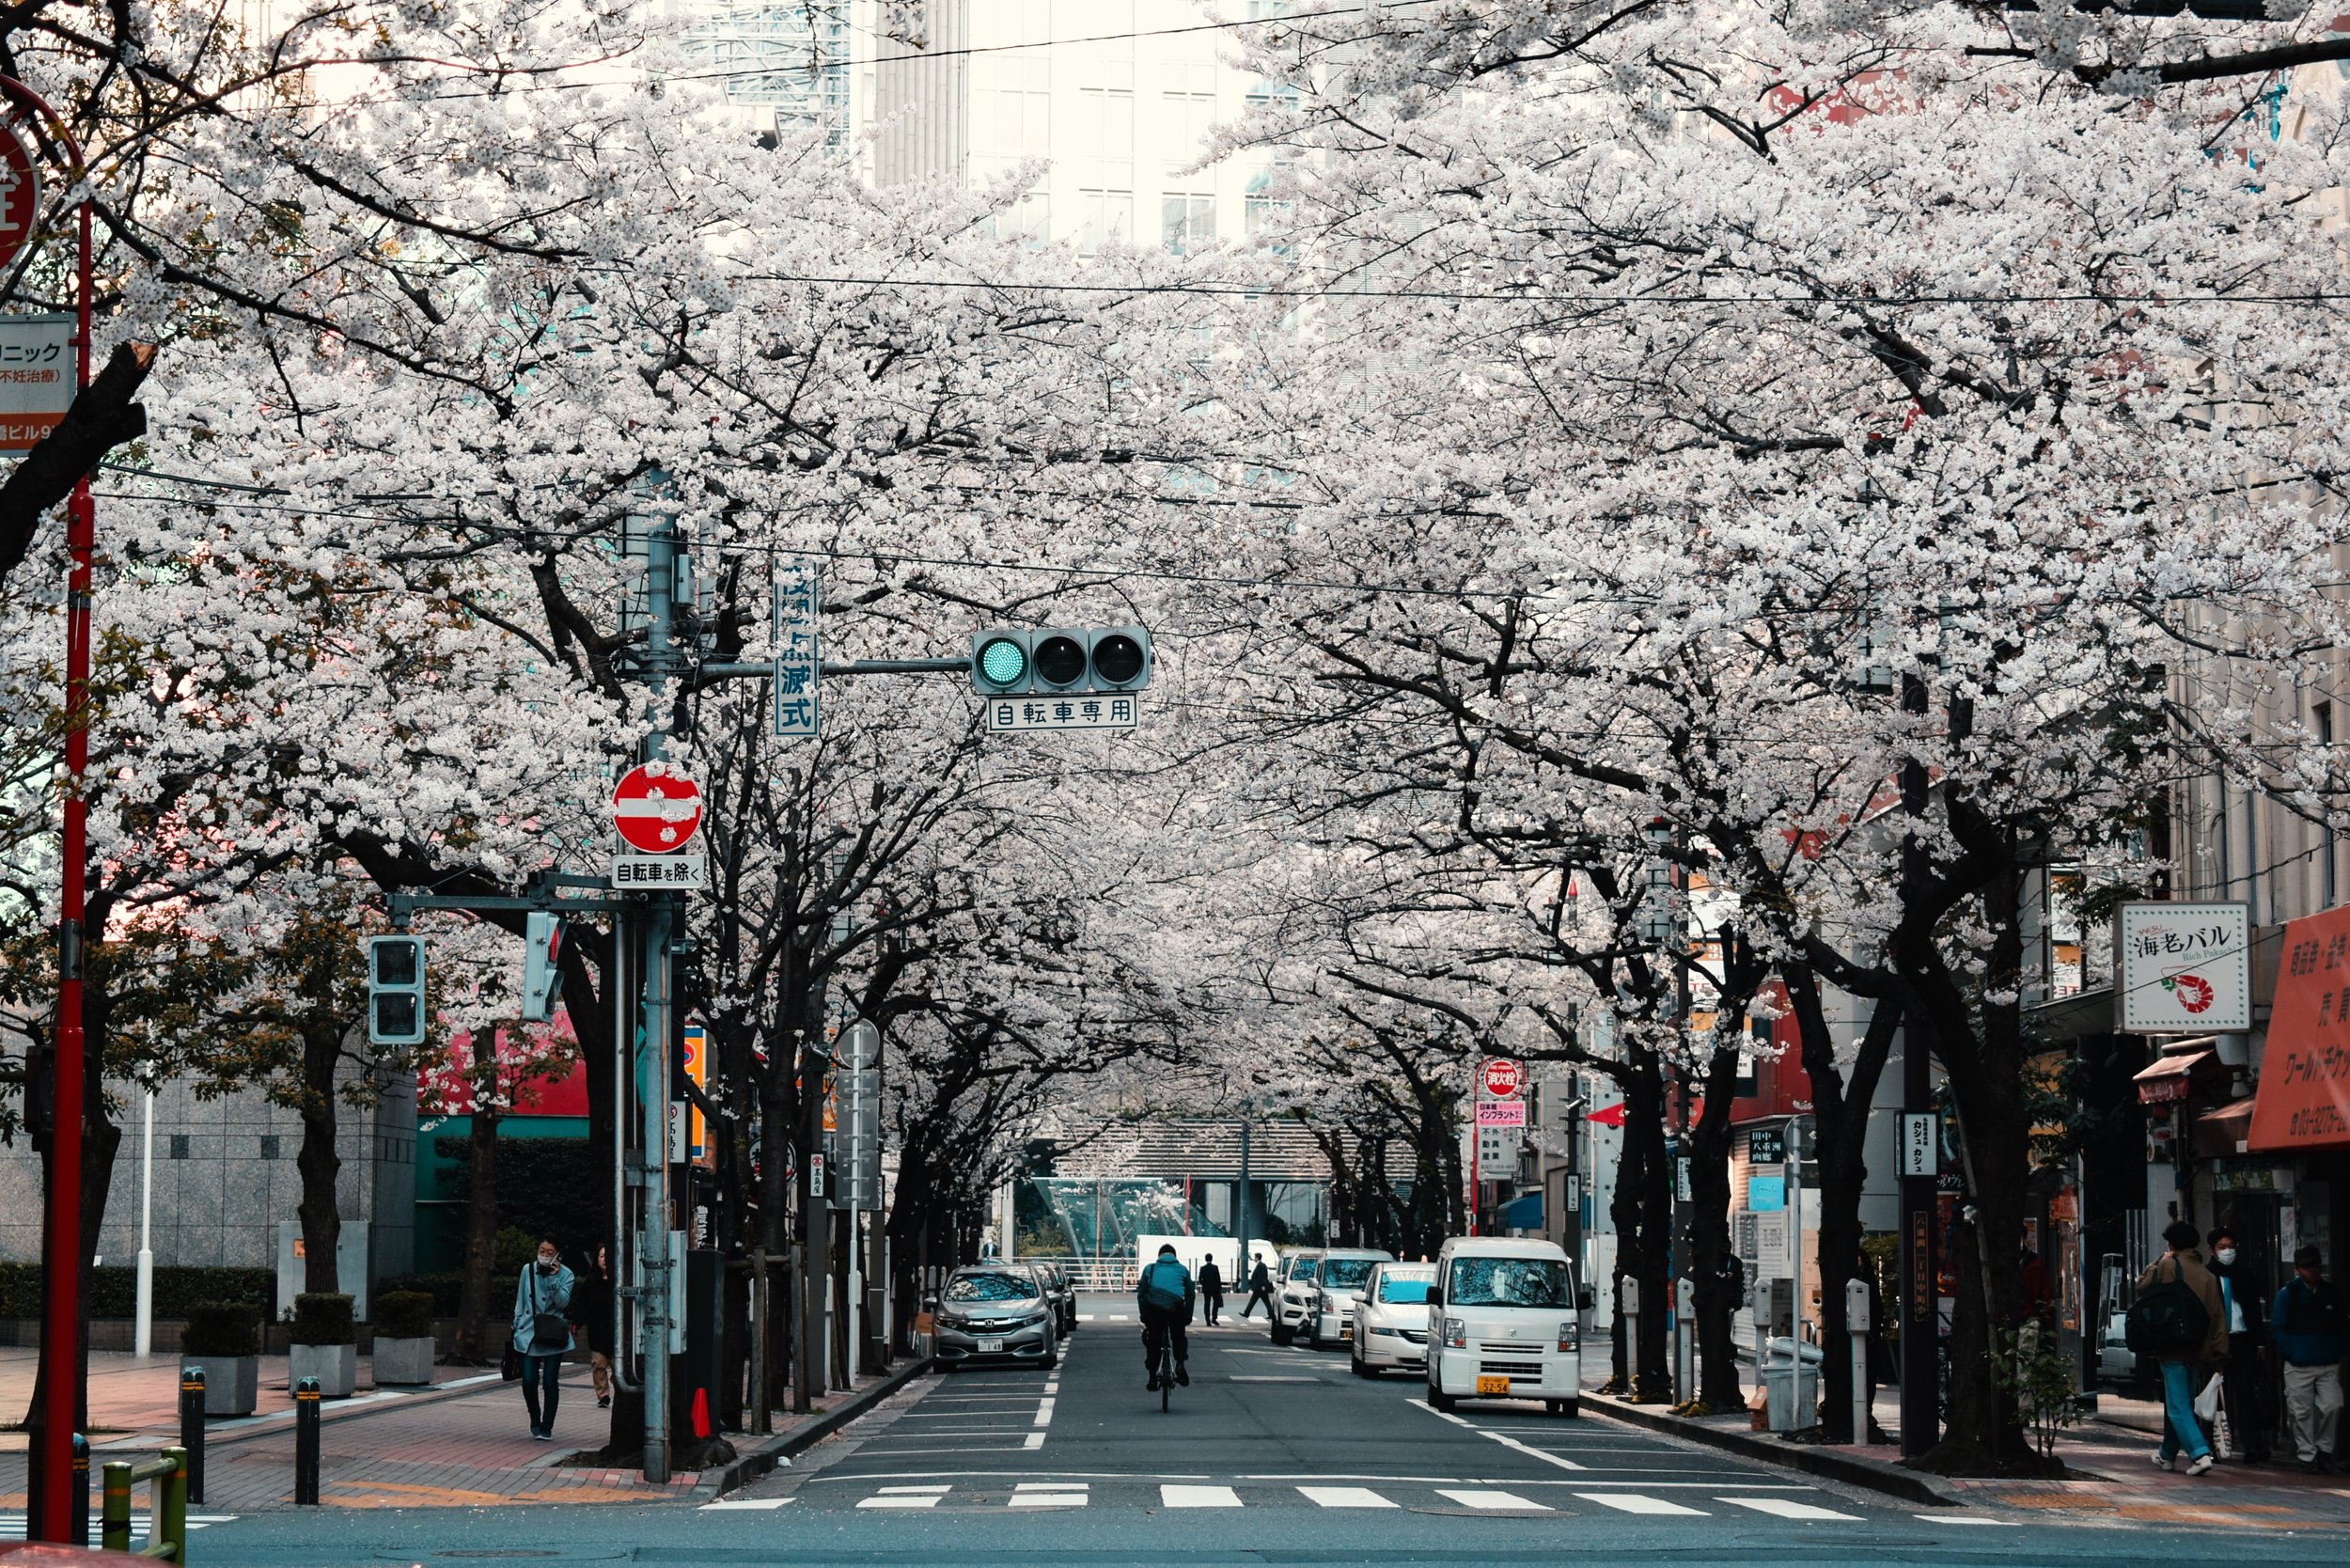   Study, Earn, and Live in Japan Program  